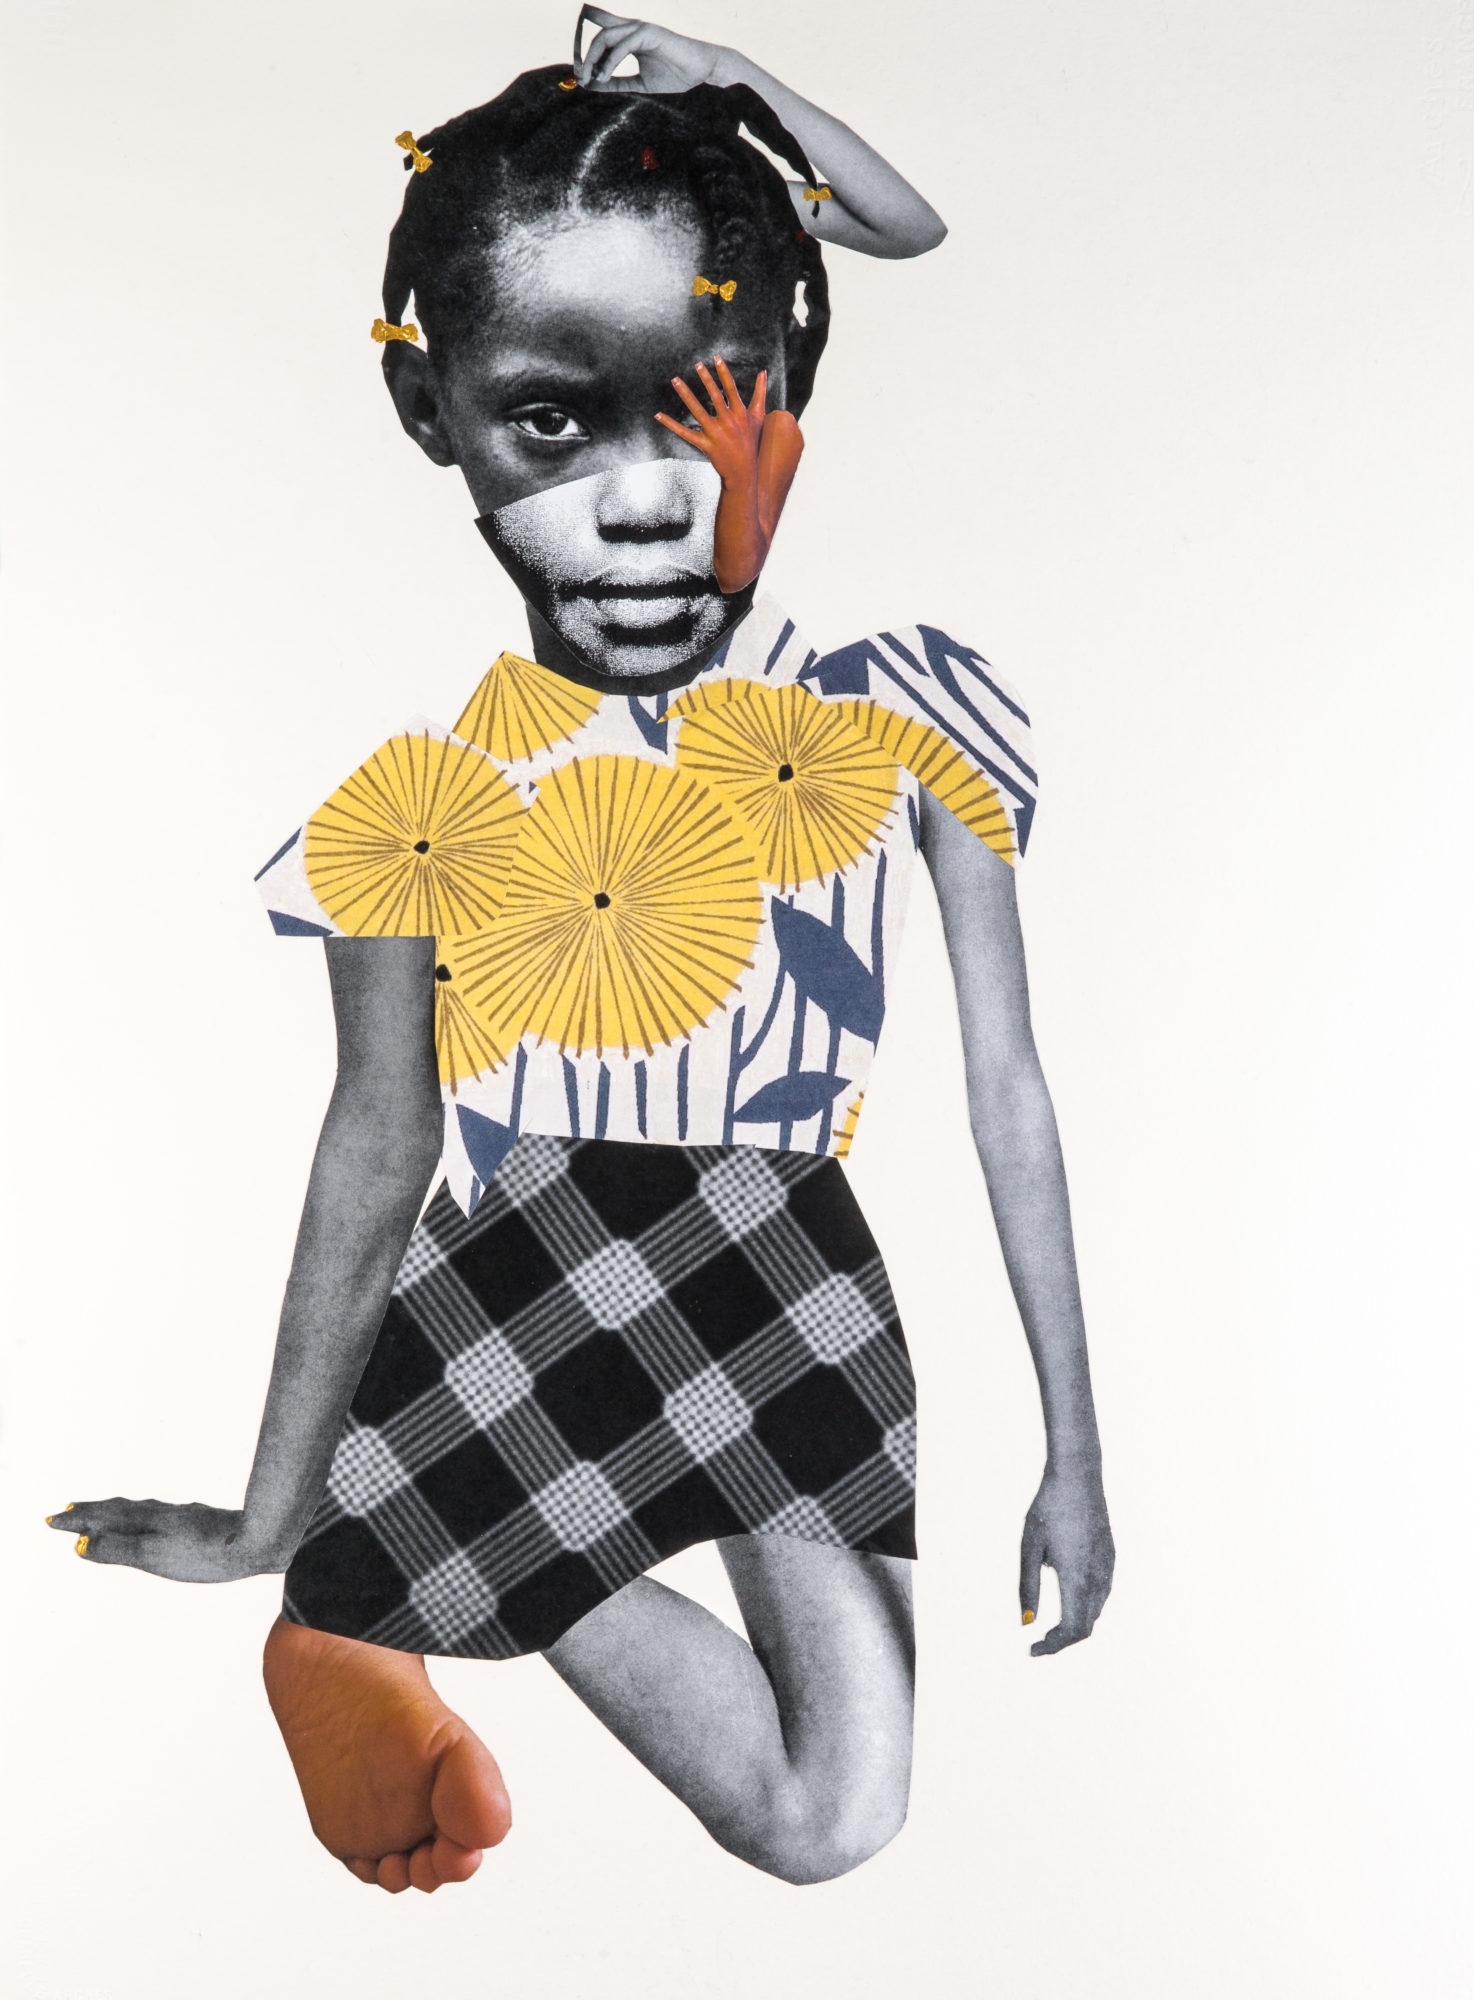 Composite image by Deborah Roberts on a white background featuring several combined photographs of different body parts to form a mostly black and white portrait of a girl wearing a shirt with a blue, white, and yellow floral pattern, a plaid black and white skirt, and yellow barrettes.